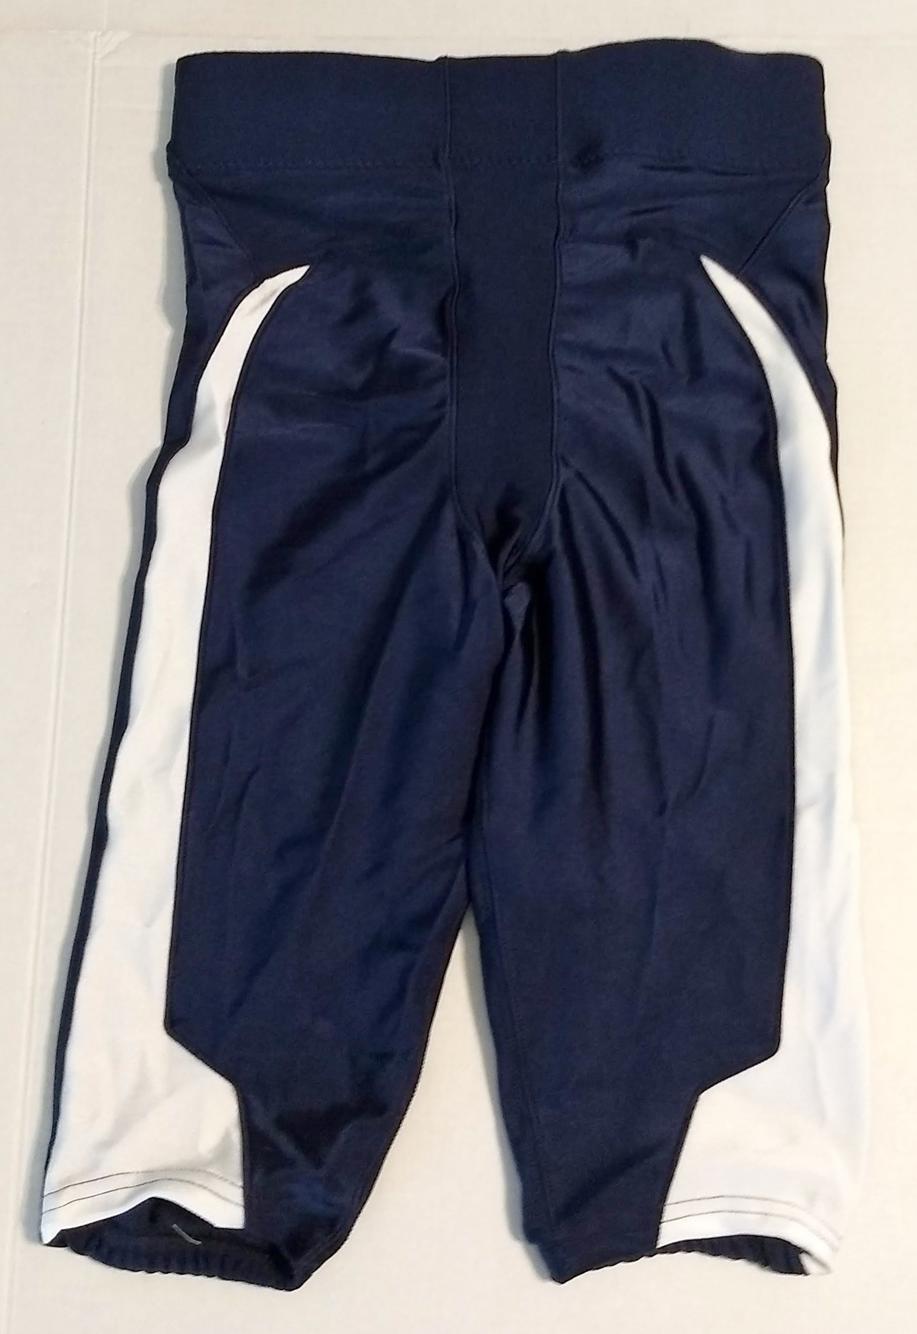 Free Shipping! White Youth XL Champion Challenger Football Game Pant Navy 